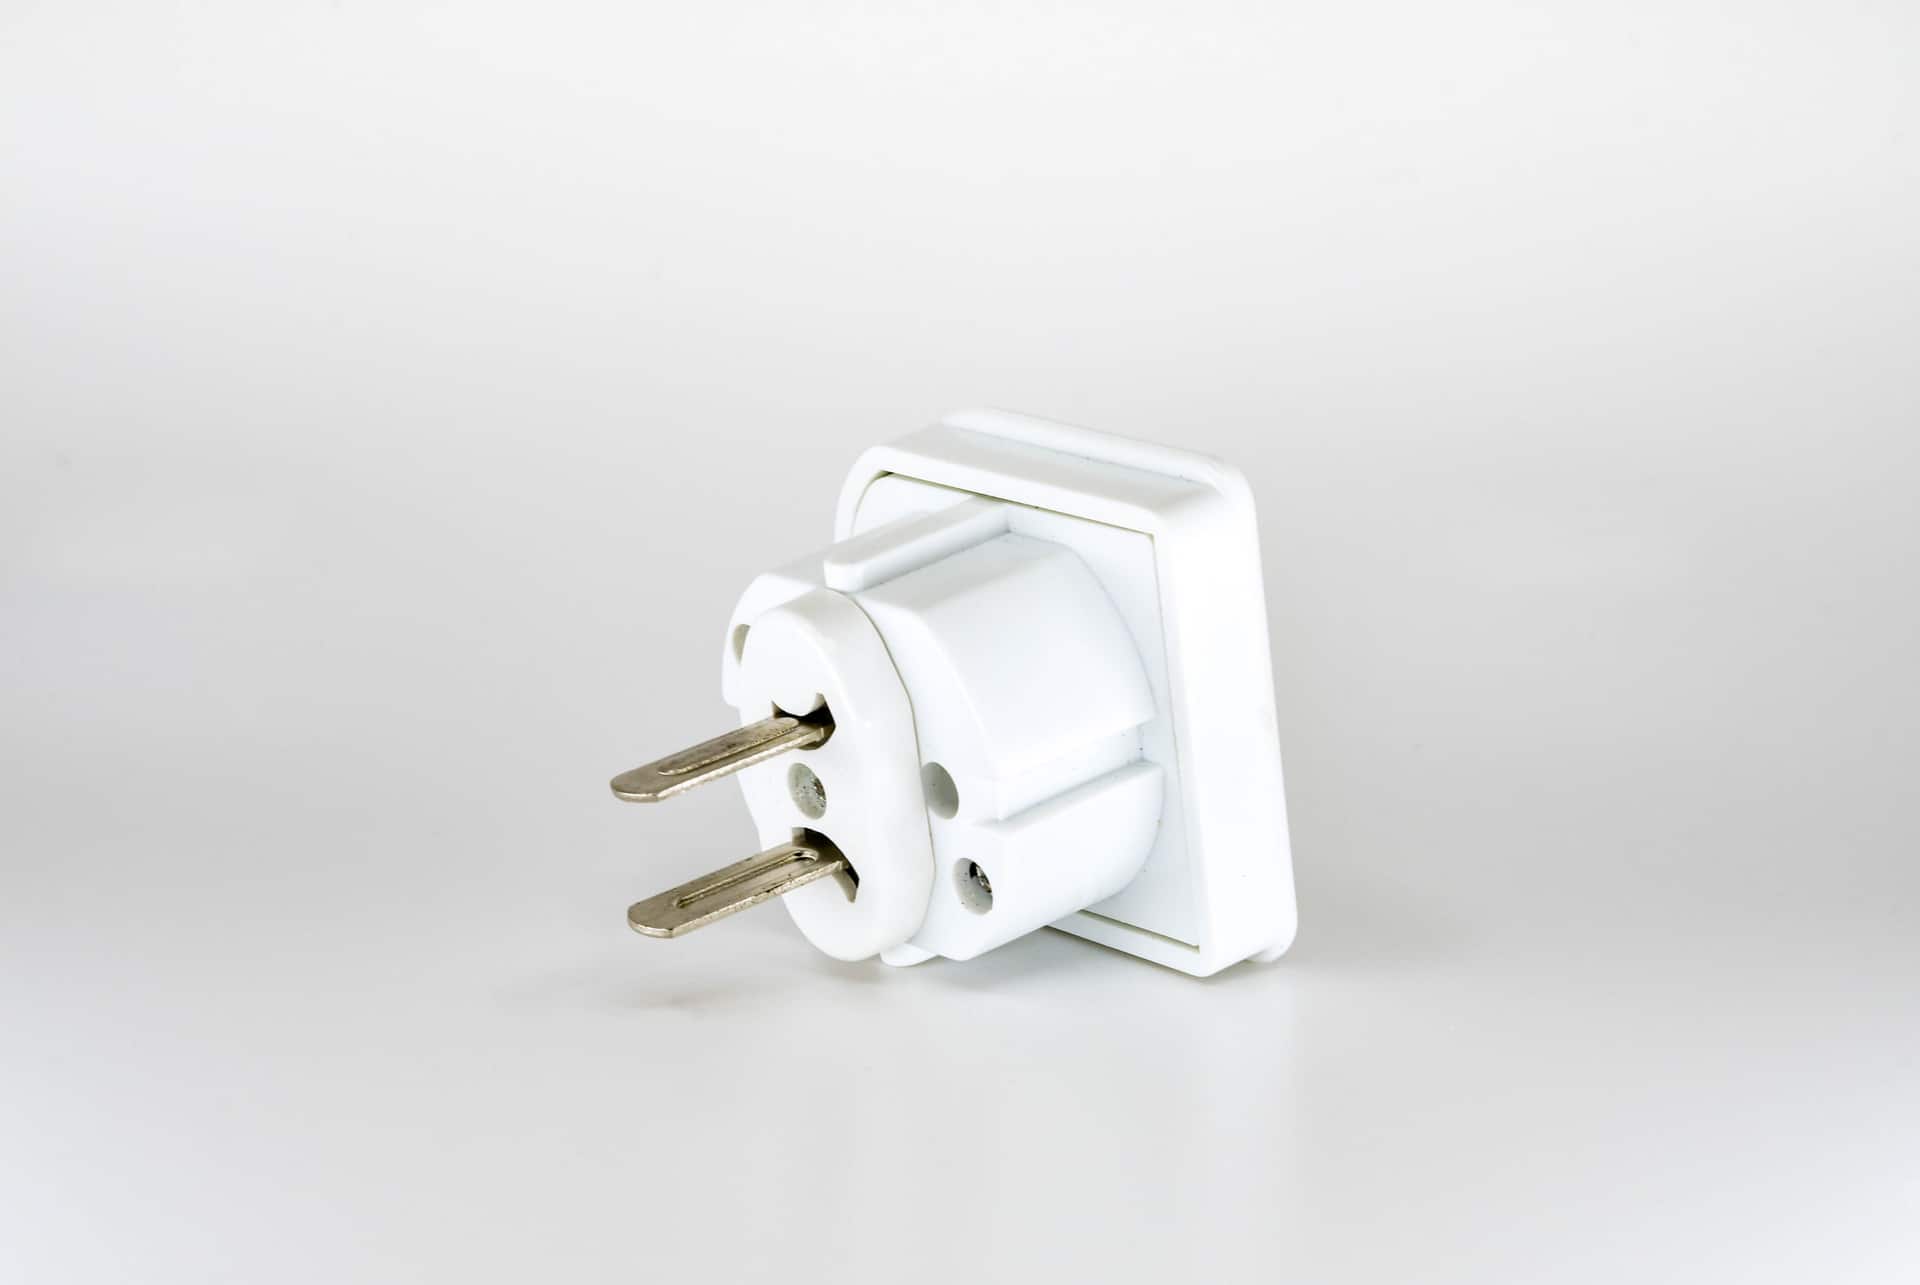 adapter for electrical outlets in the USA